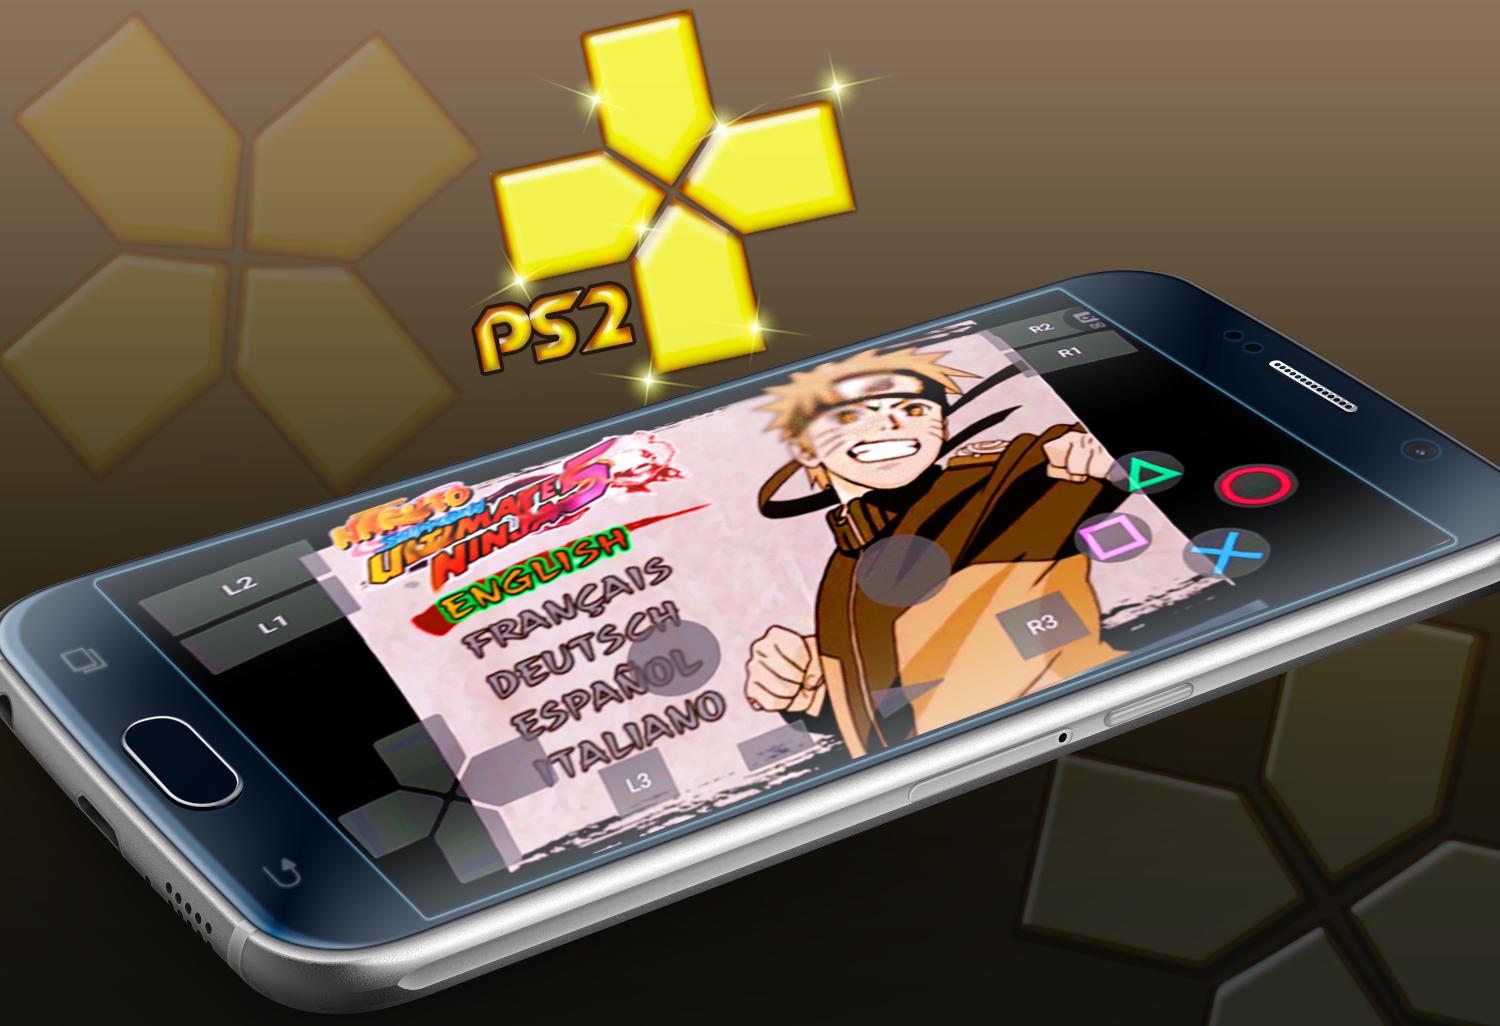 Emulator Gold PS2 (PRO PPSS2 Golden) for Android - APK Download